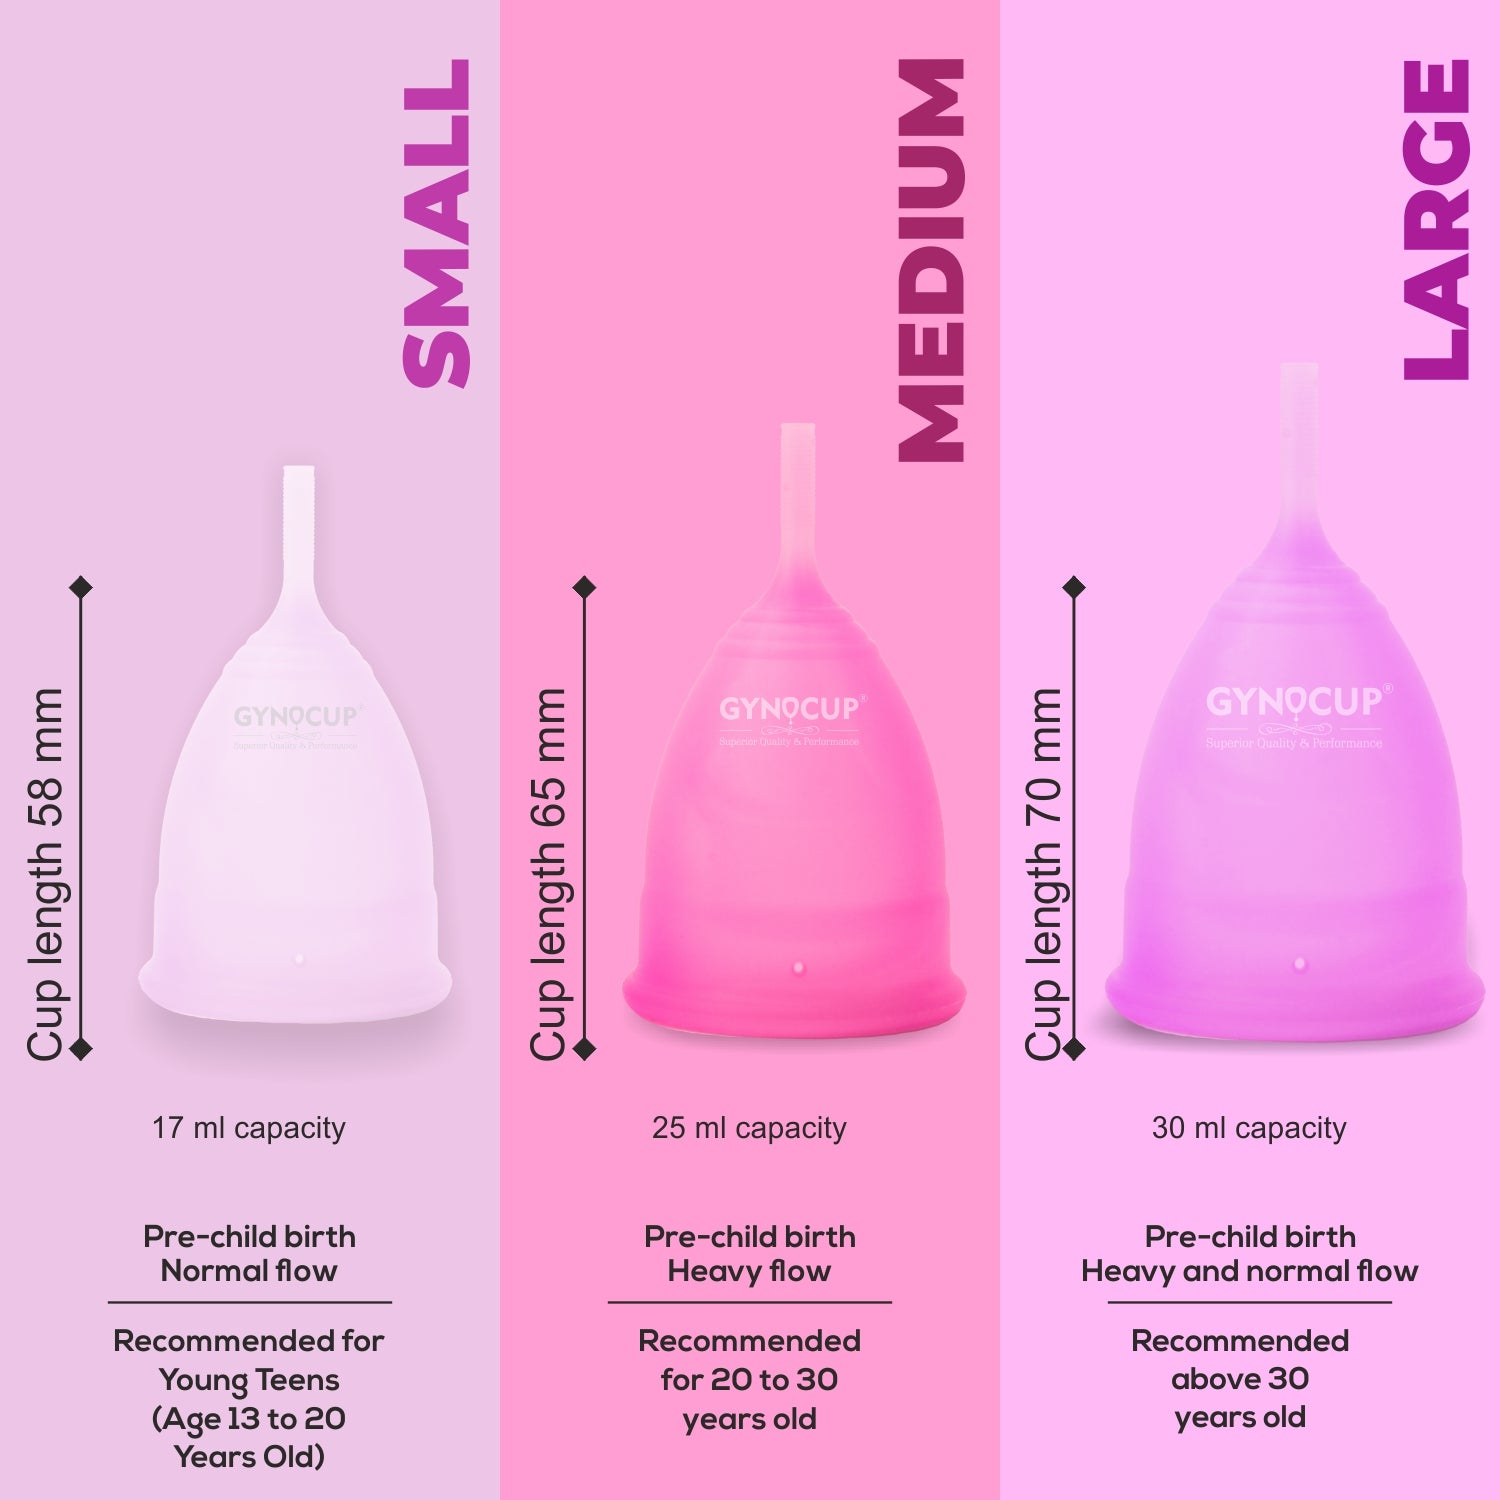 Menstrual Cup + Sterilizing Container (Combo)